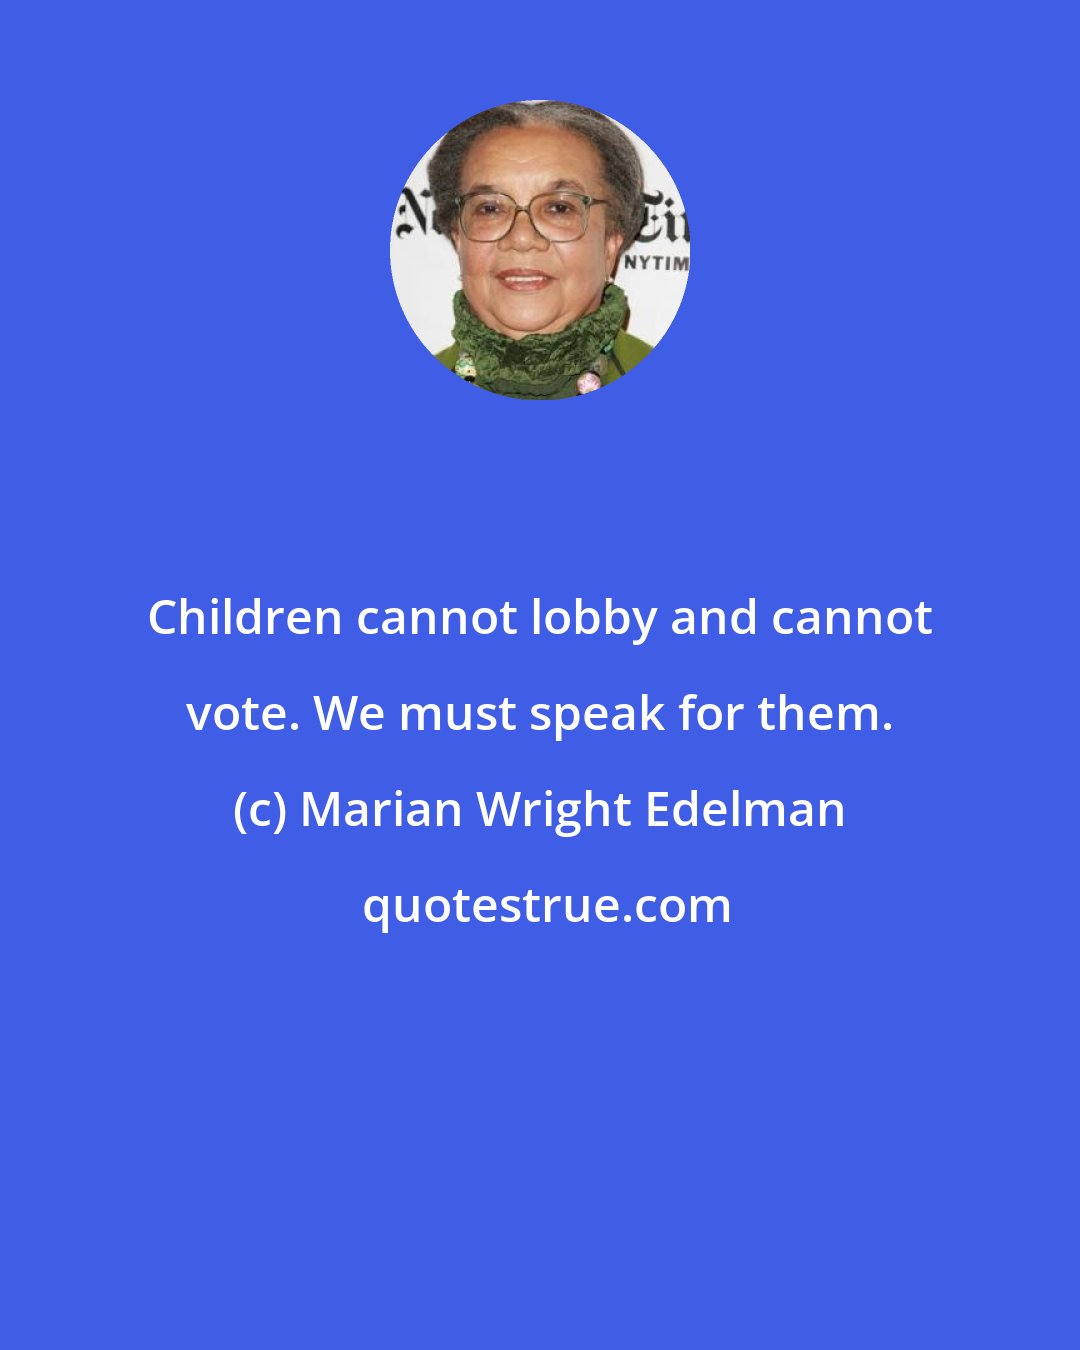 Marian Wright Edelman: Children cannot lobby and cannot vote. We must speak for them.